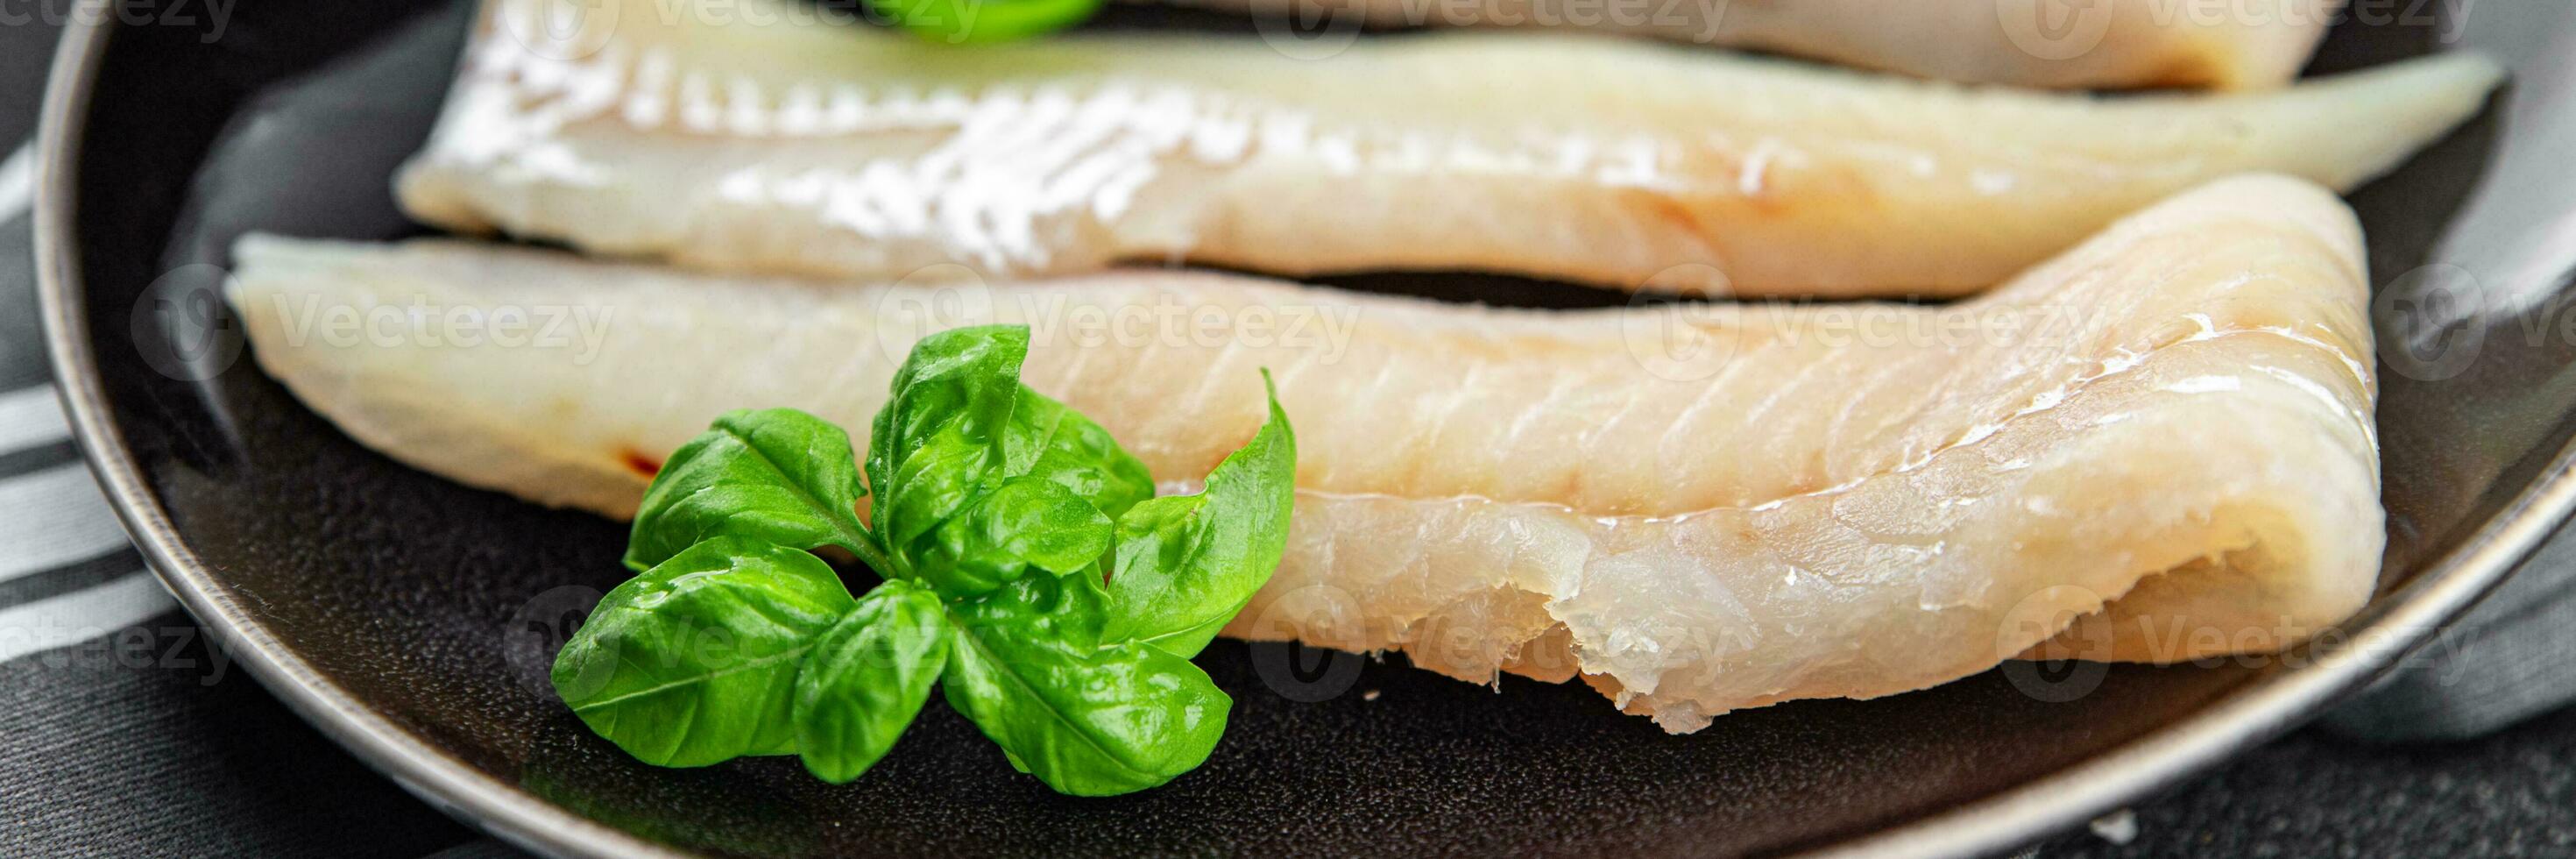 blue whiting fish fillet fresh seafood healthy eating cooking appetizer meal food snack on the table copy space food background rustic top view photo